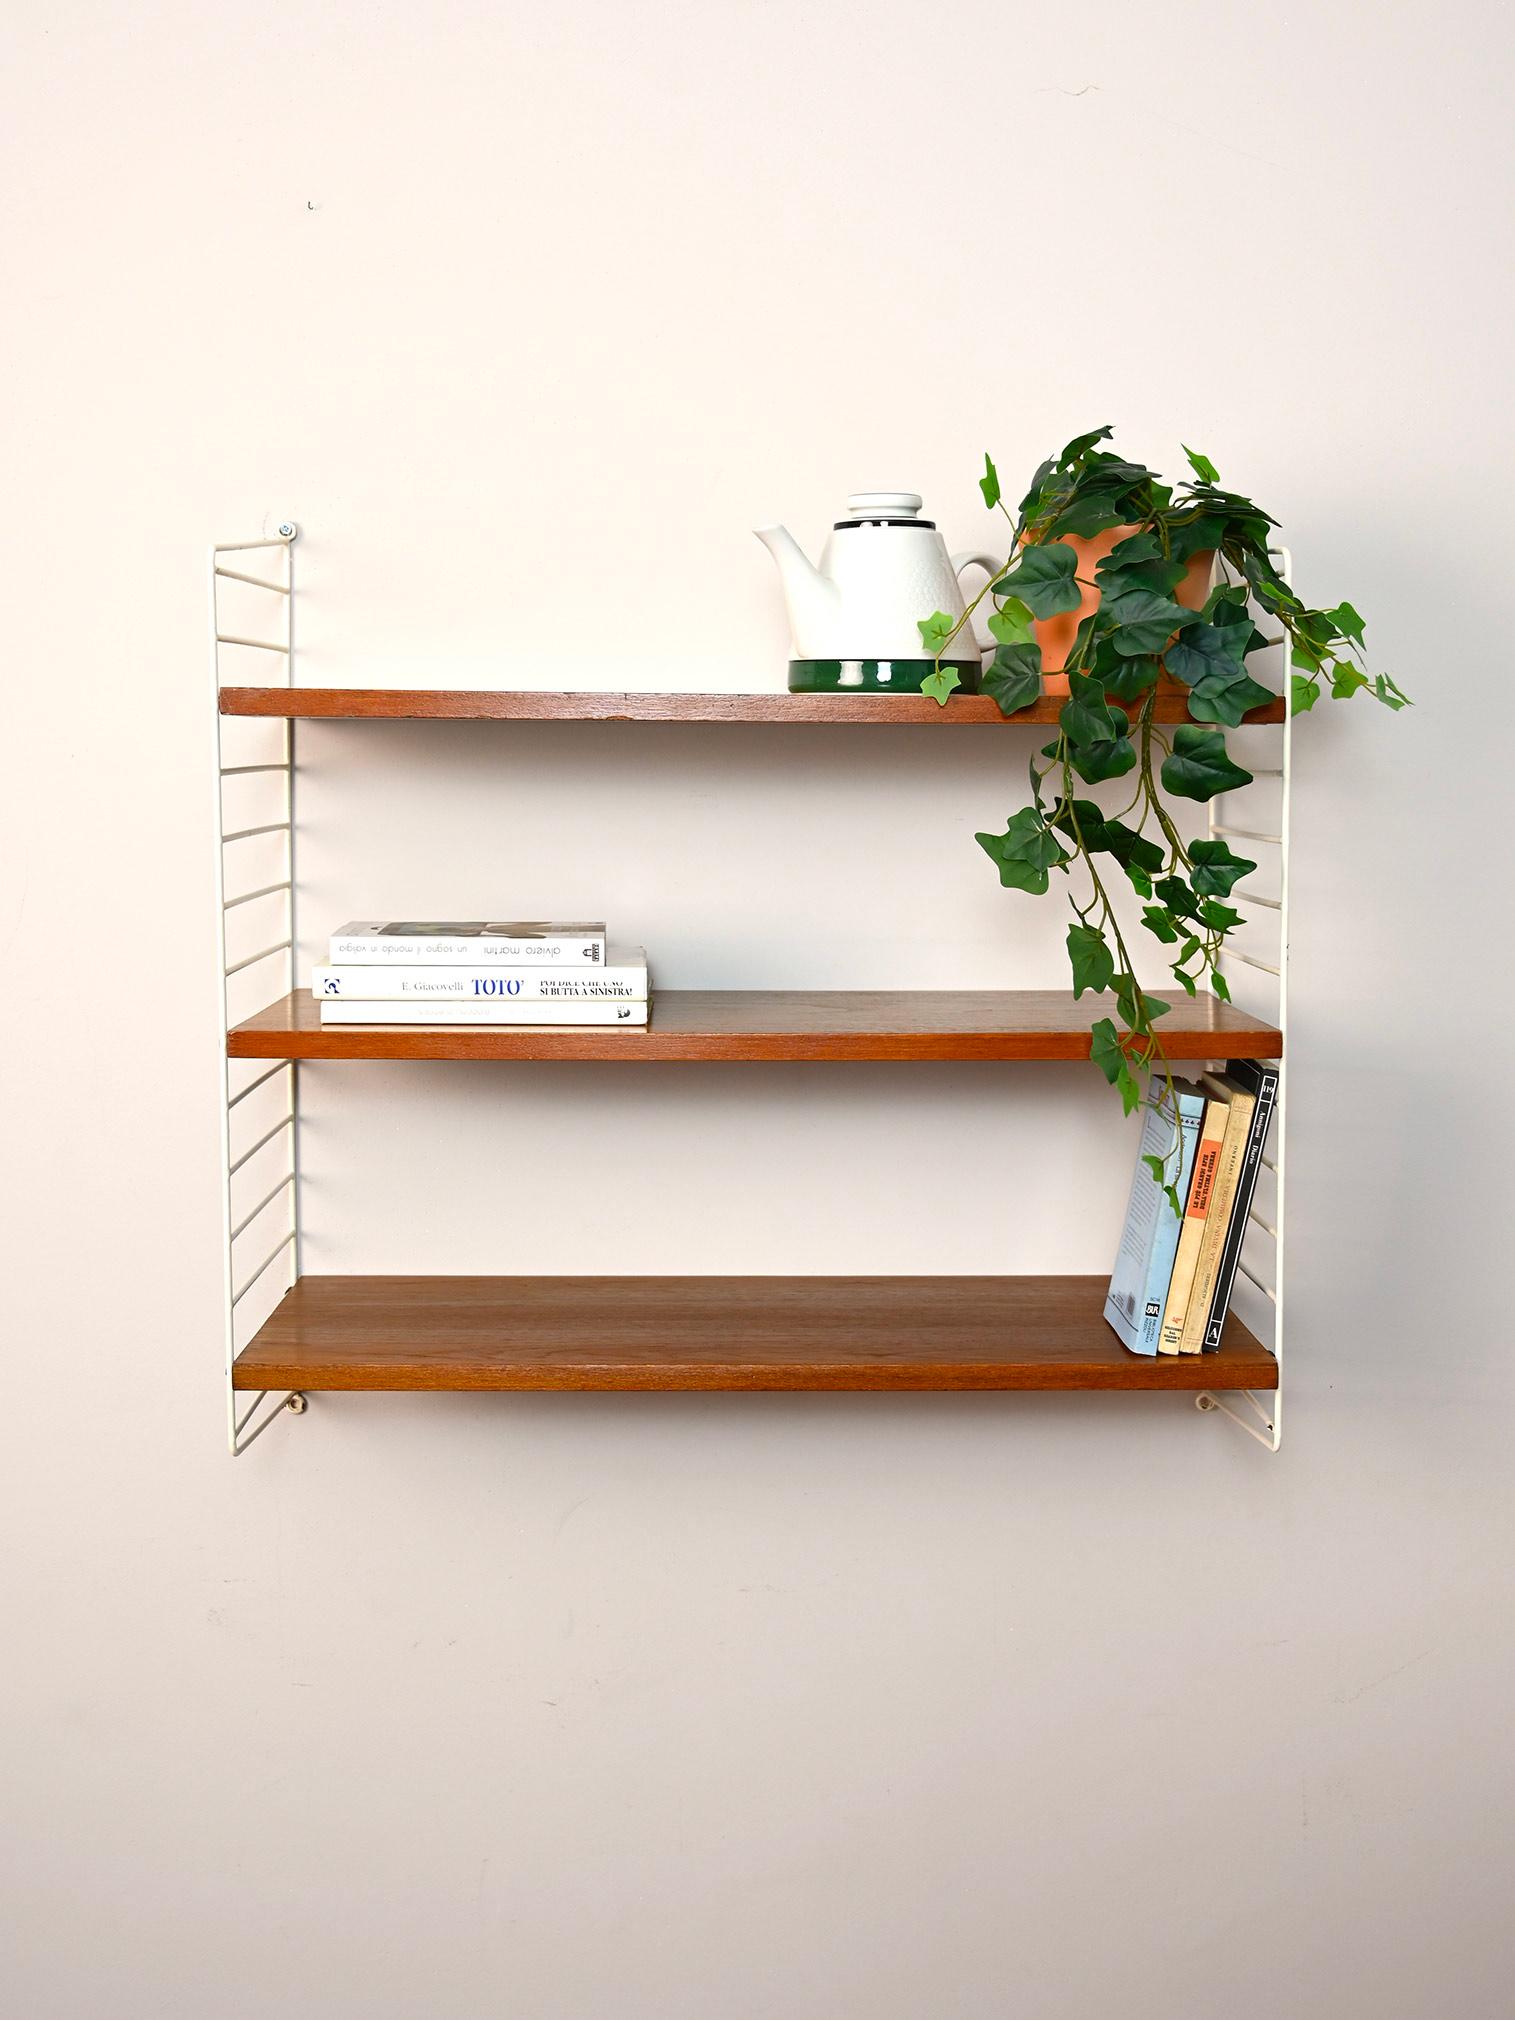 Original Swedish shelving system from the 1960s.

This simple shelving system consists of a coated metal side frame on which three wooden shelves fit.
Simple and functional it can be hung in different rooms of the house.

Good condition. It has been